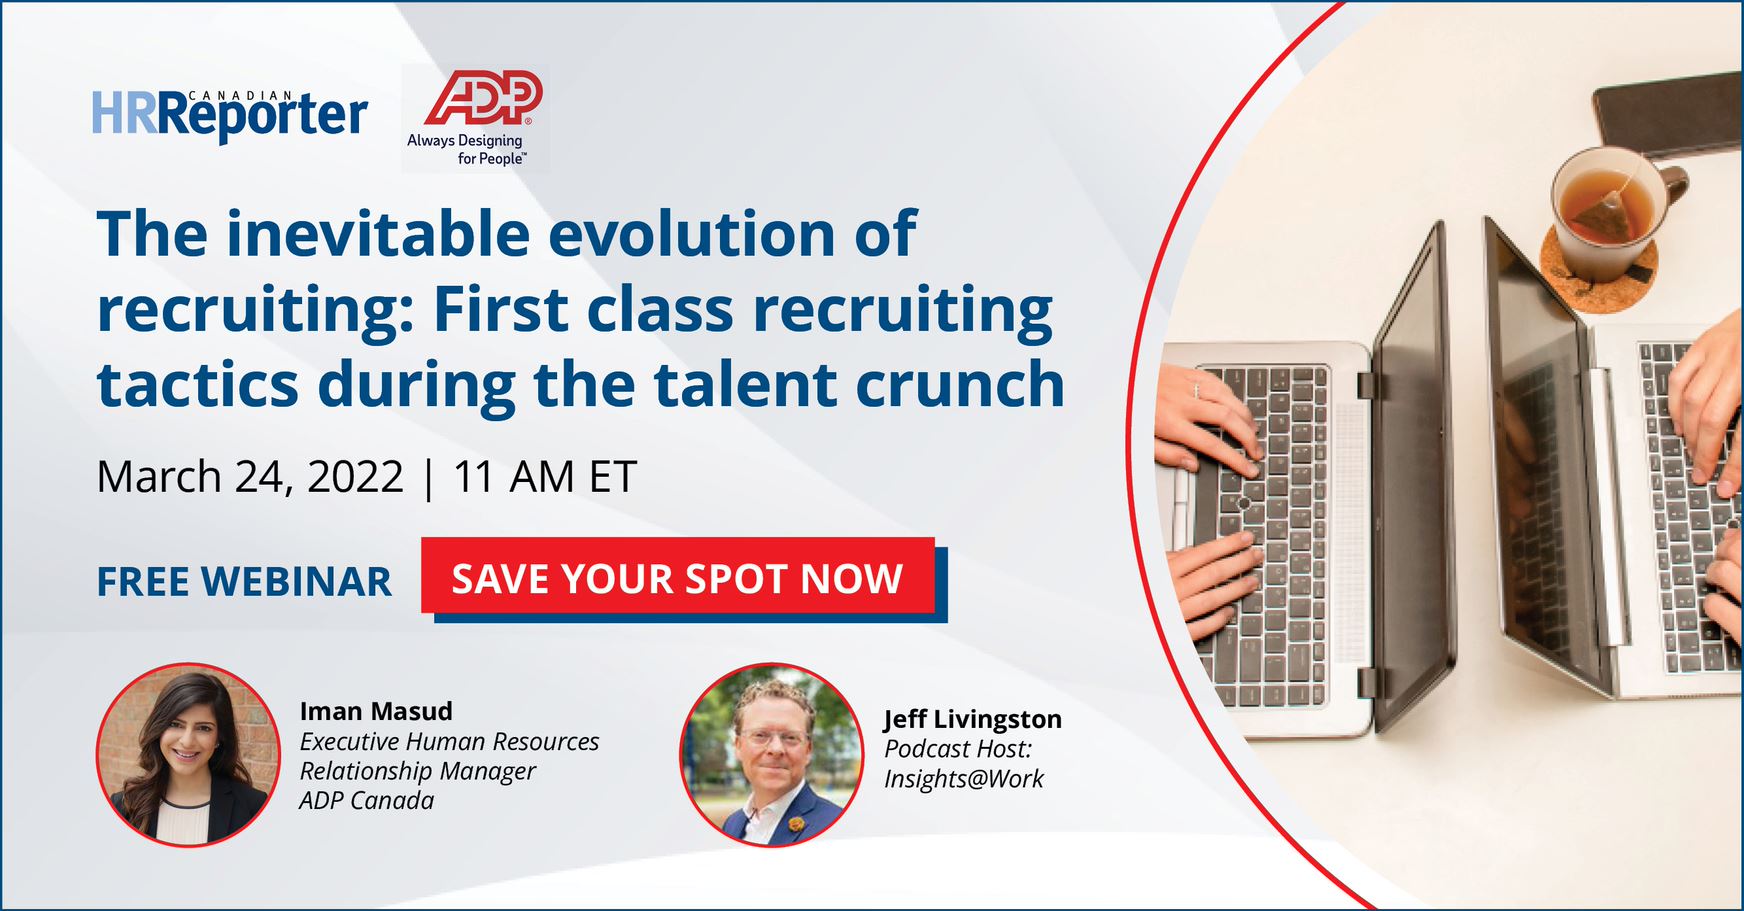 The inevitable evolution of recruiting: First class recruiting tactics during the talent crunch